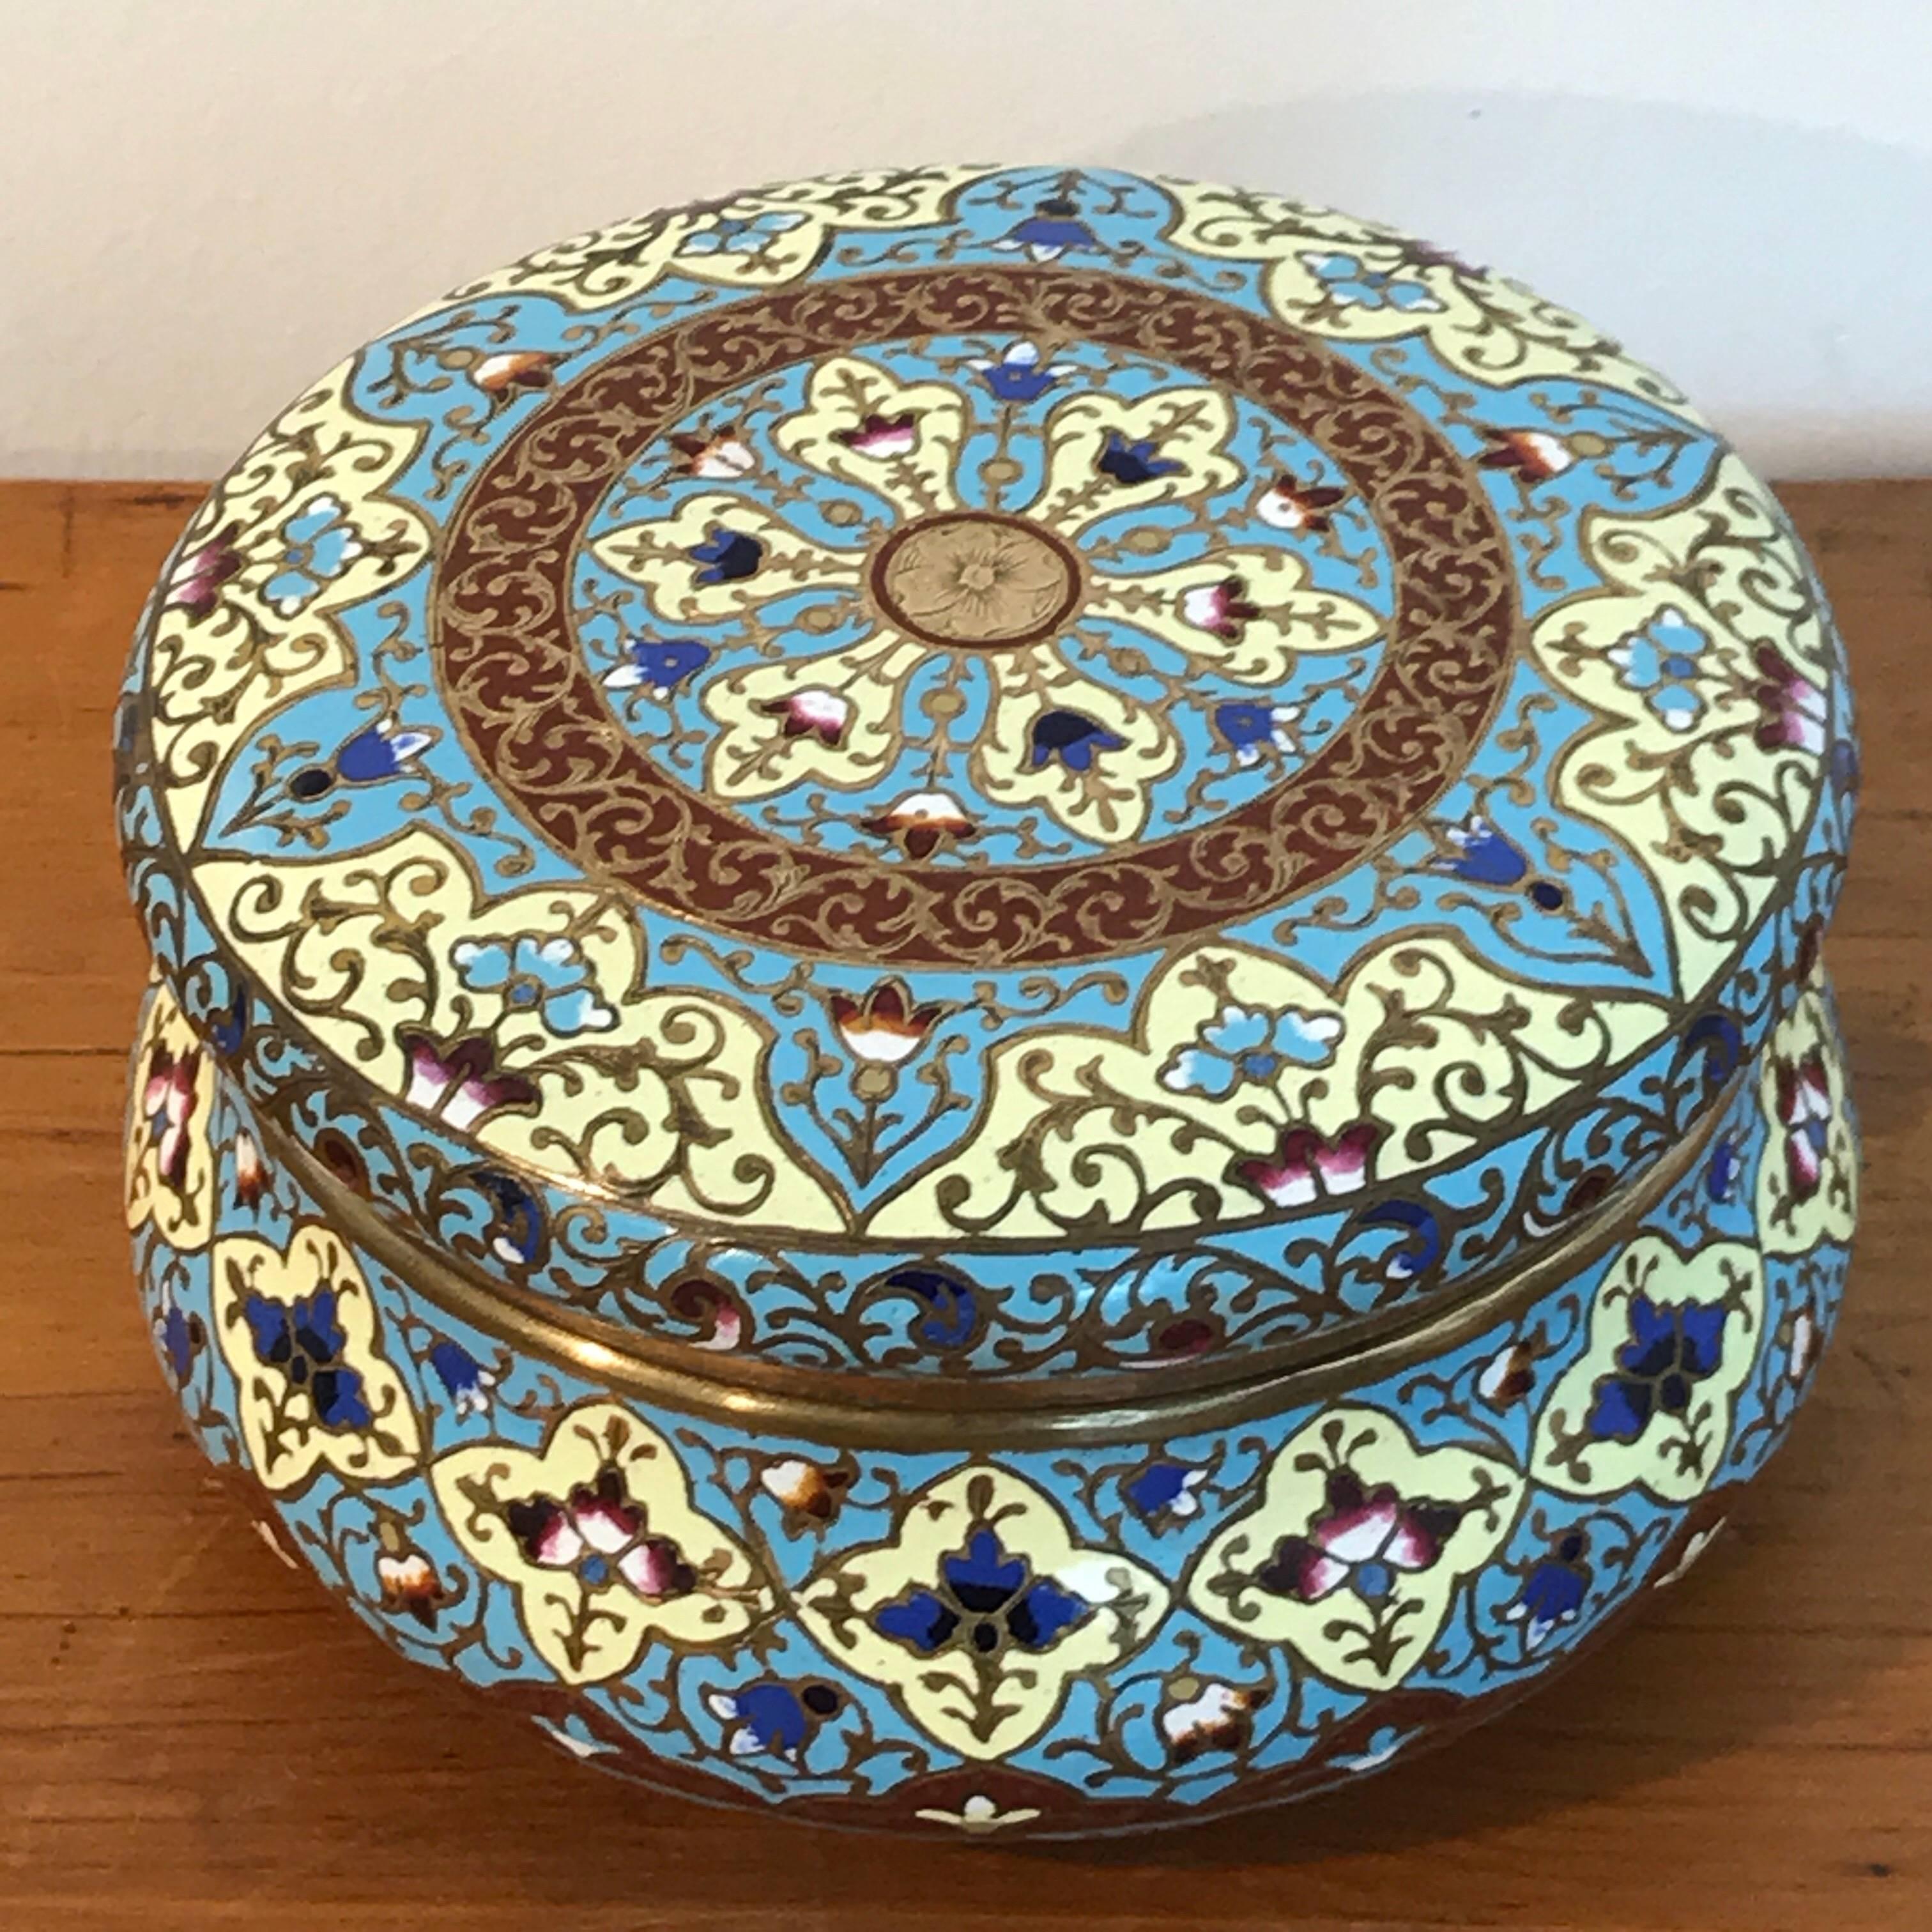 Belle Époque French Enamel Table Box, Attributed to F. Barbedienne